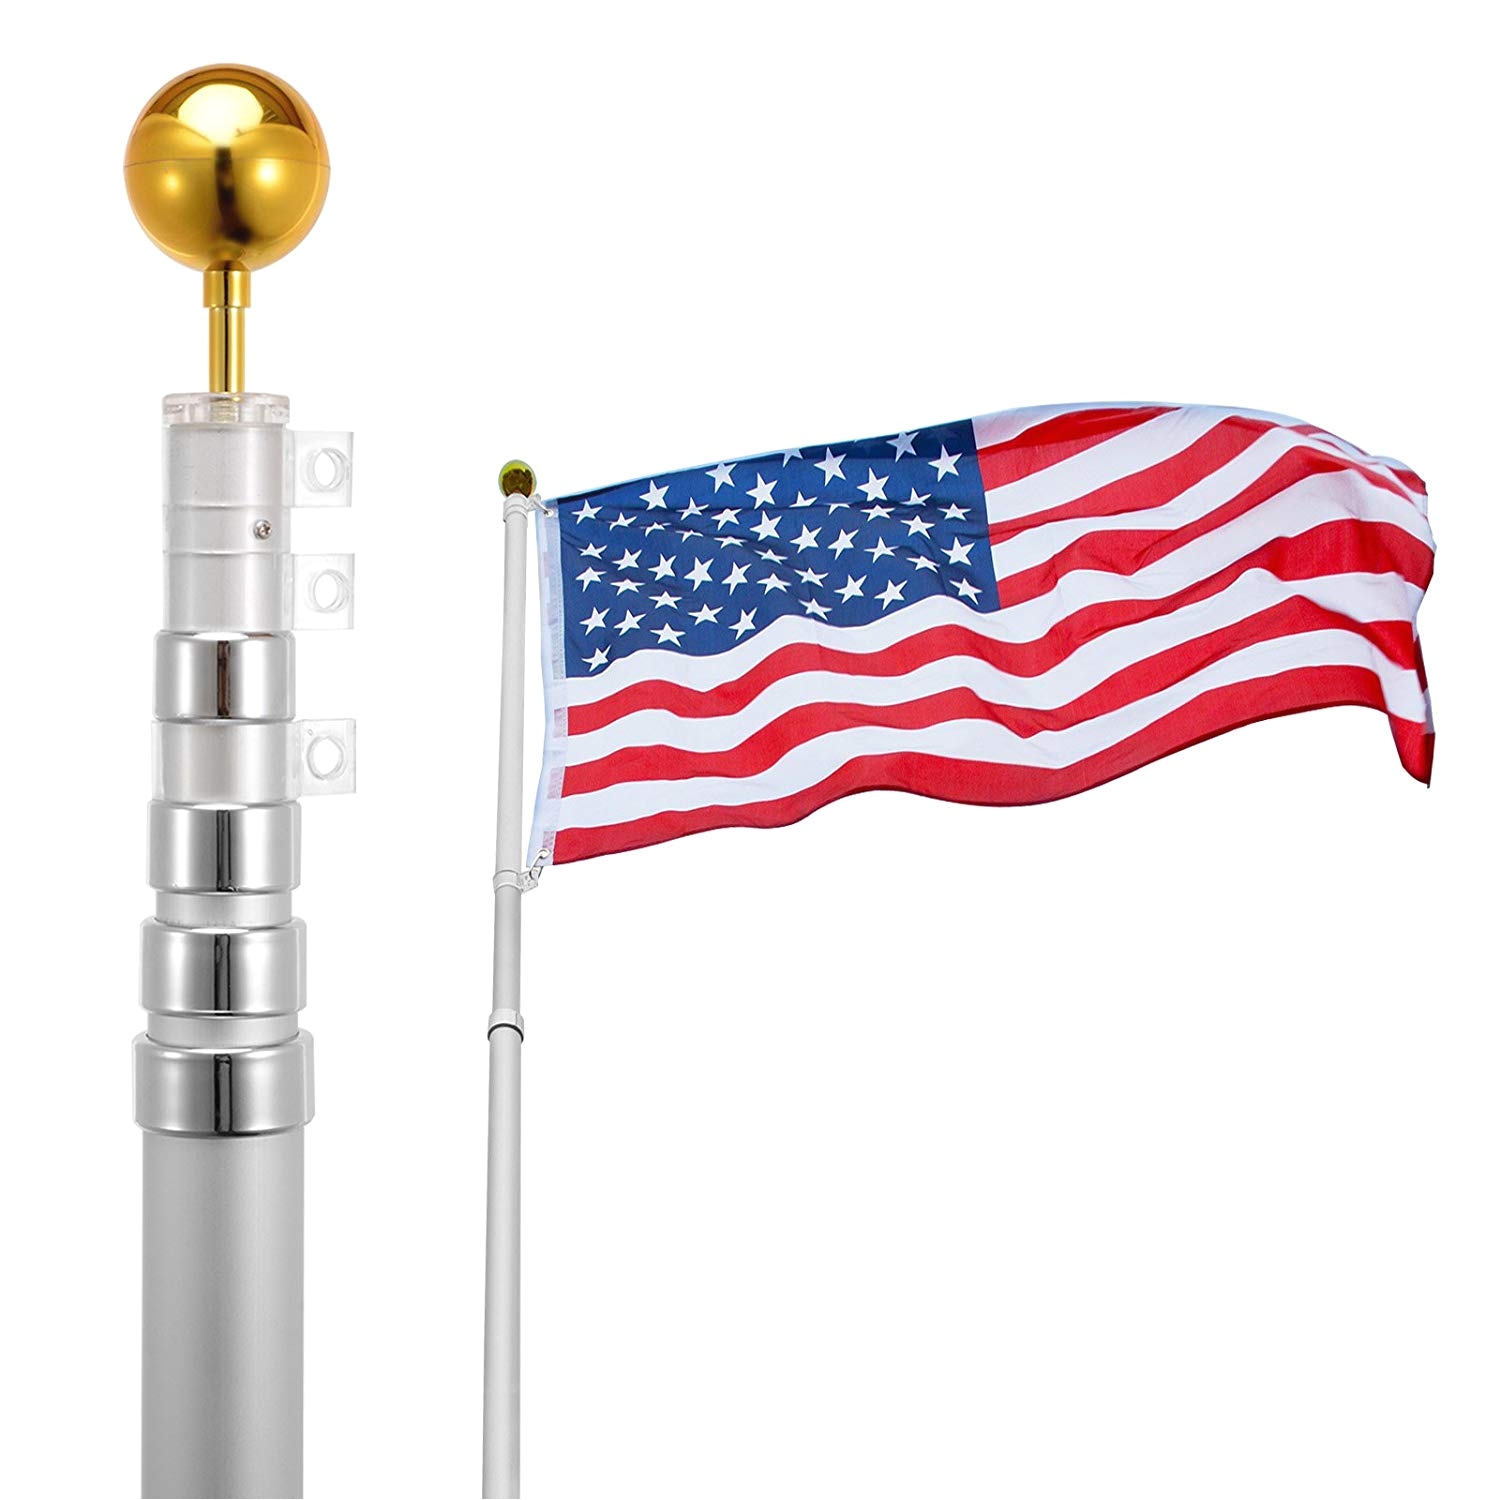 amazon com voilamart 20ft flagpole telescopic 5 sectional fly 2 flags outdoor aluminum flag pole kit with the american flag great for residential or